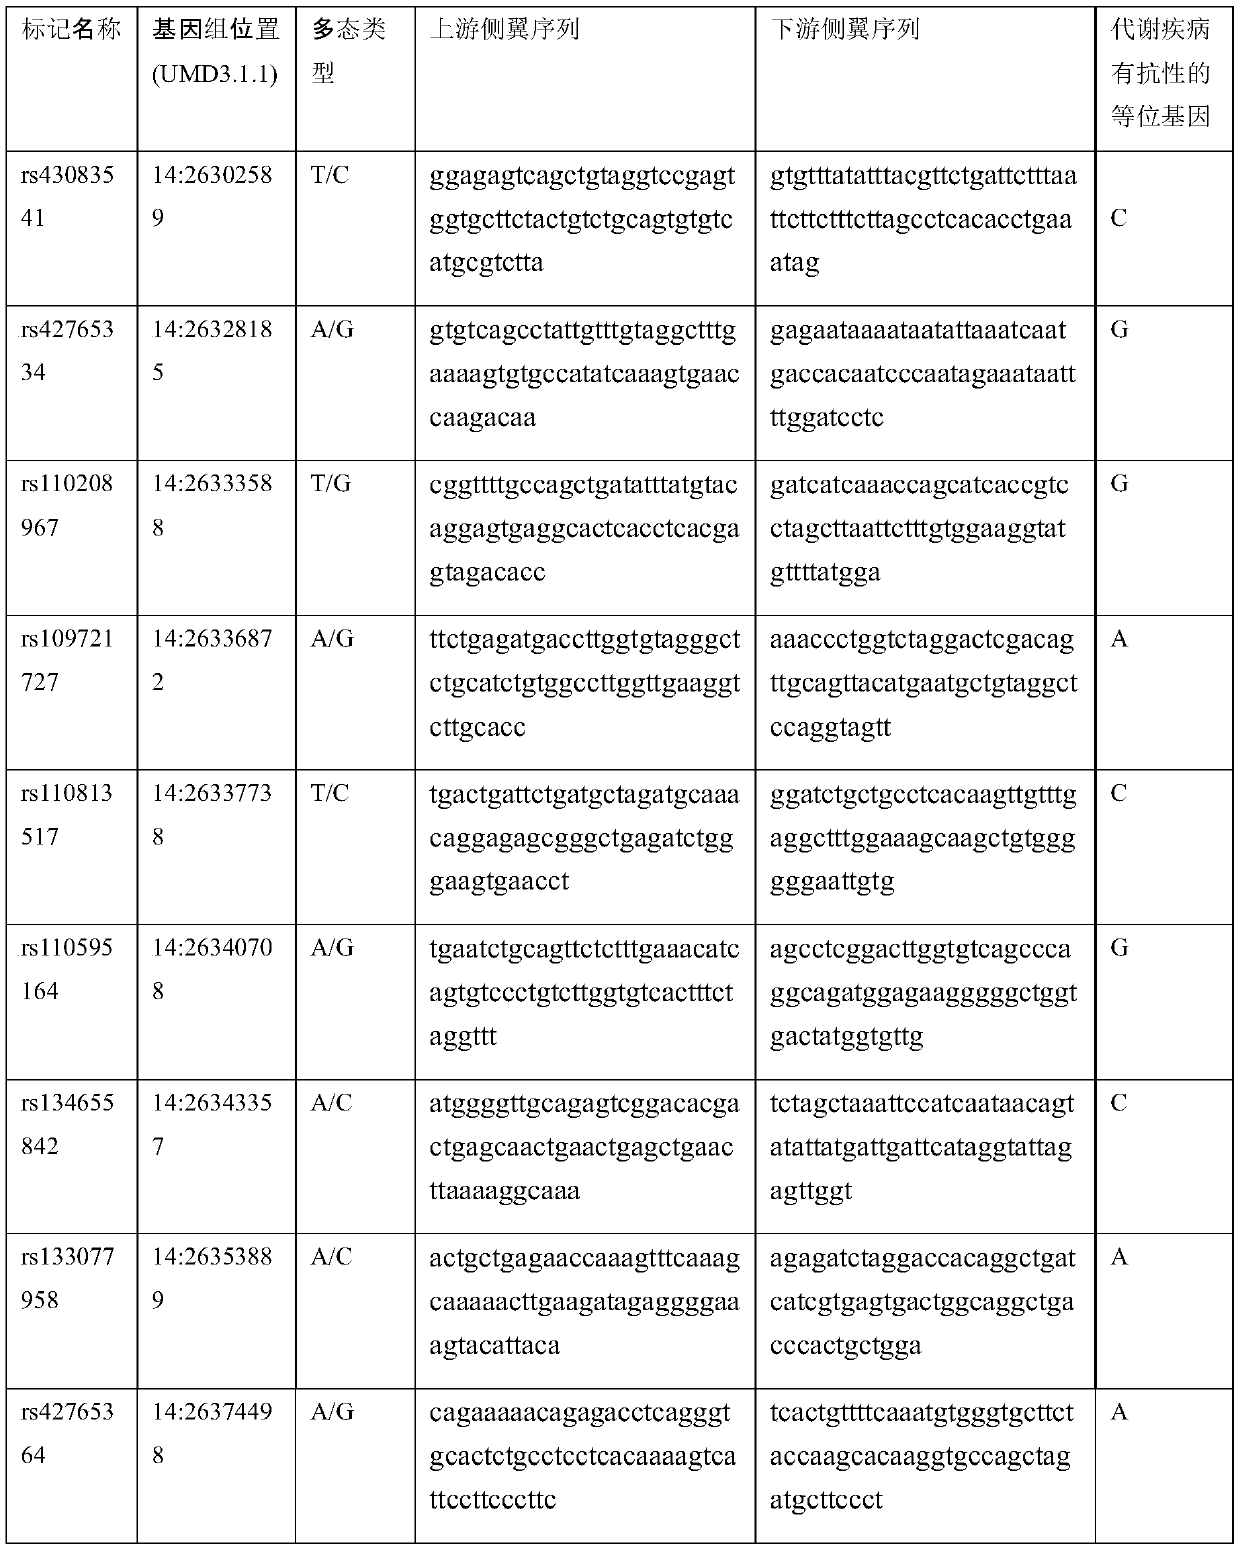 Molecular marker related to cow perinatal period metabolic disease resistance and application